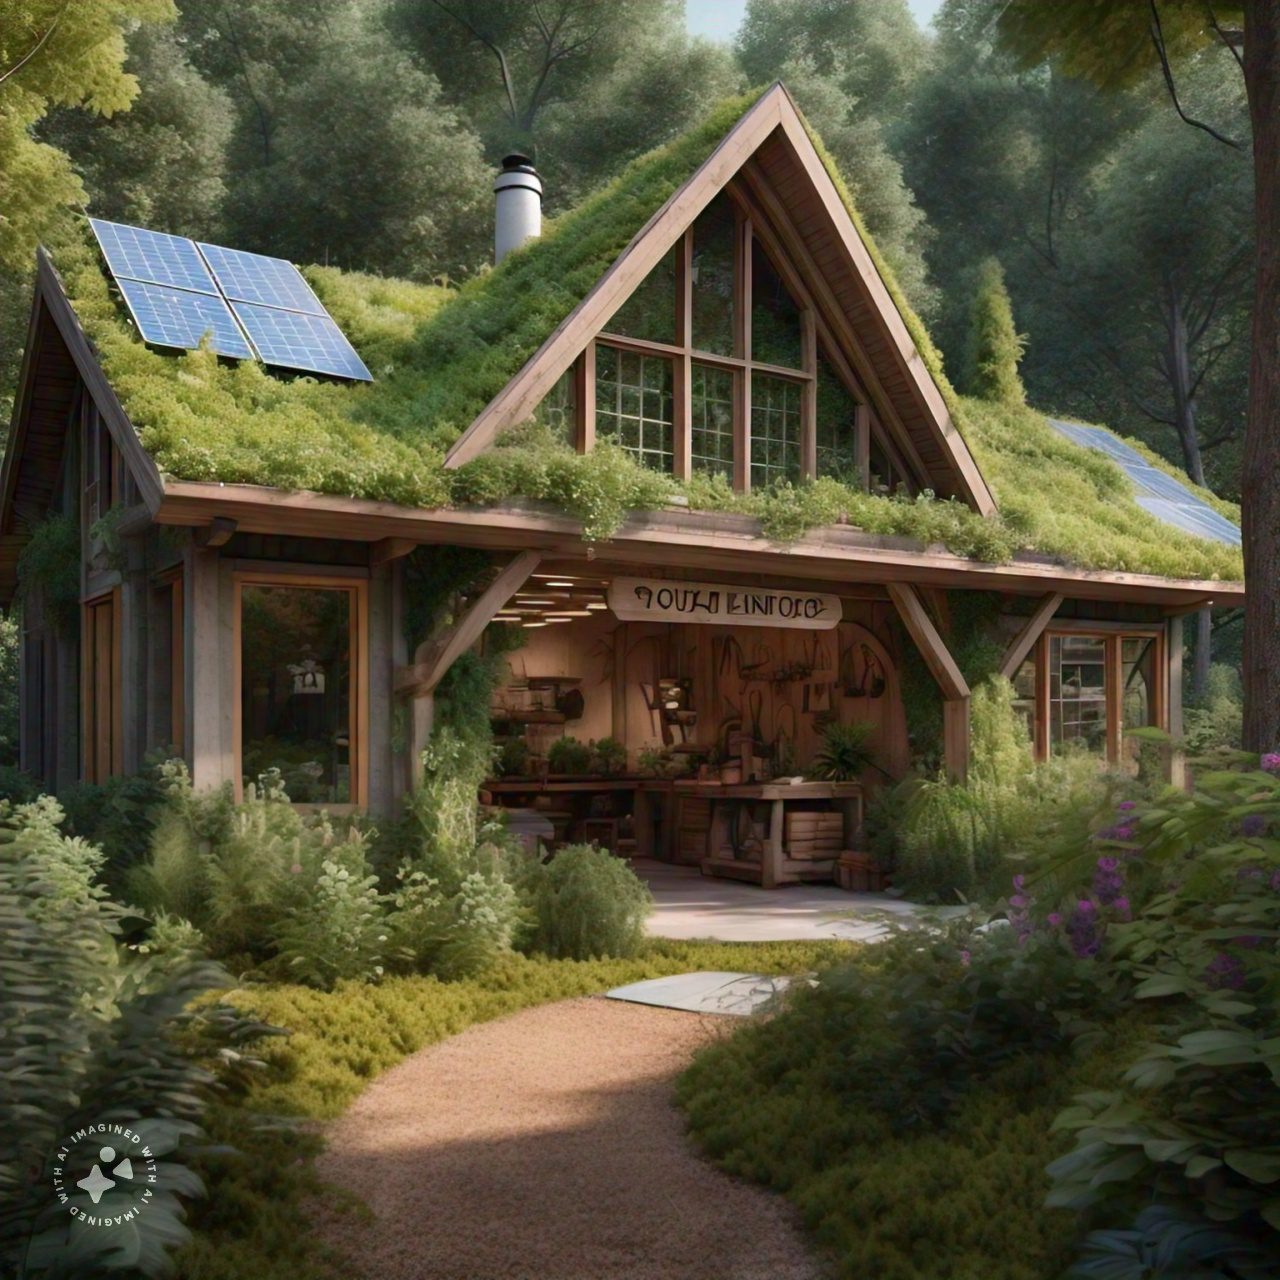 Image of an eco-home generated by meta AI